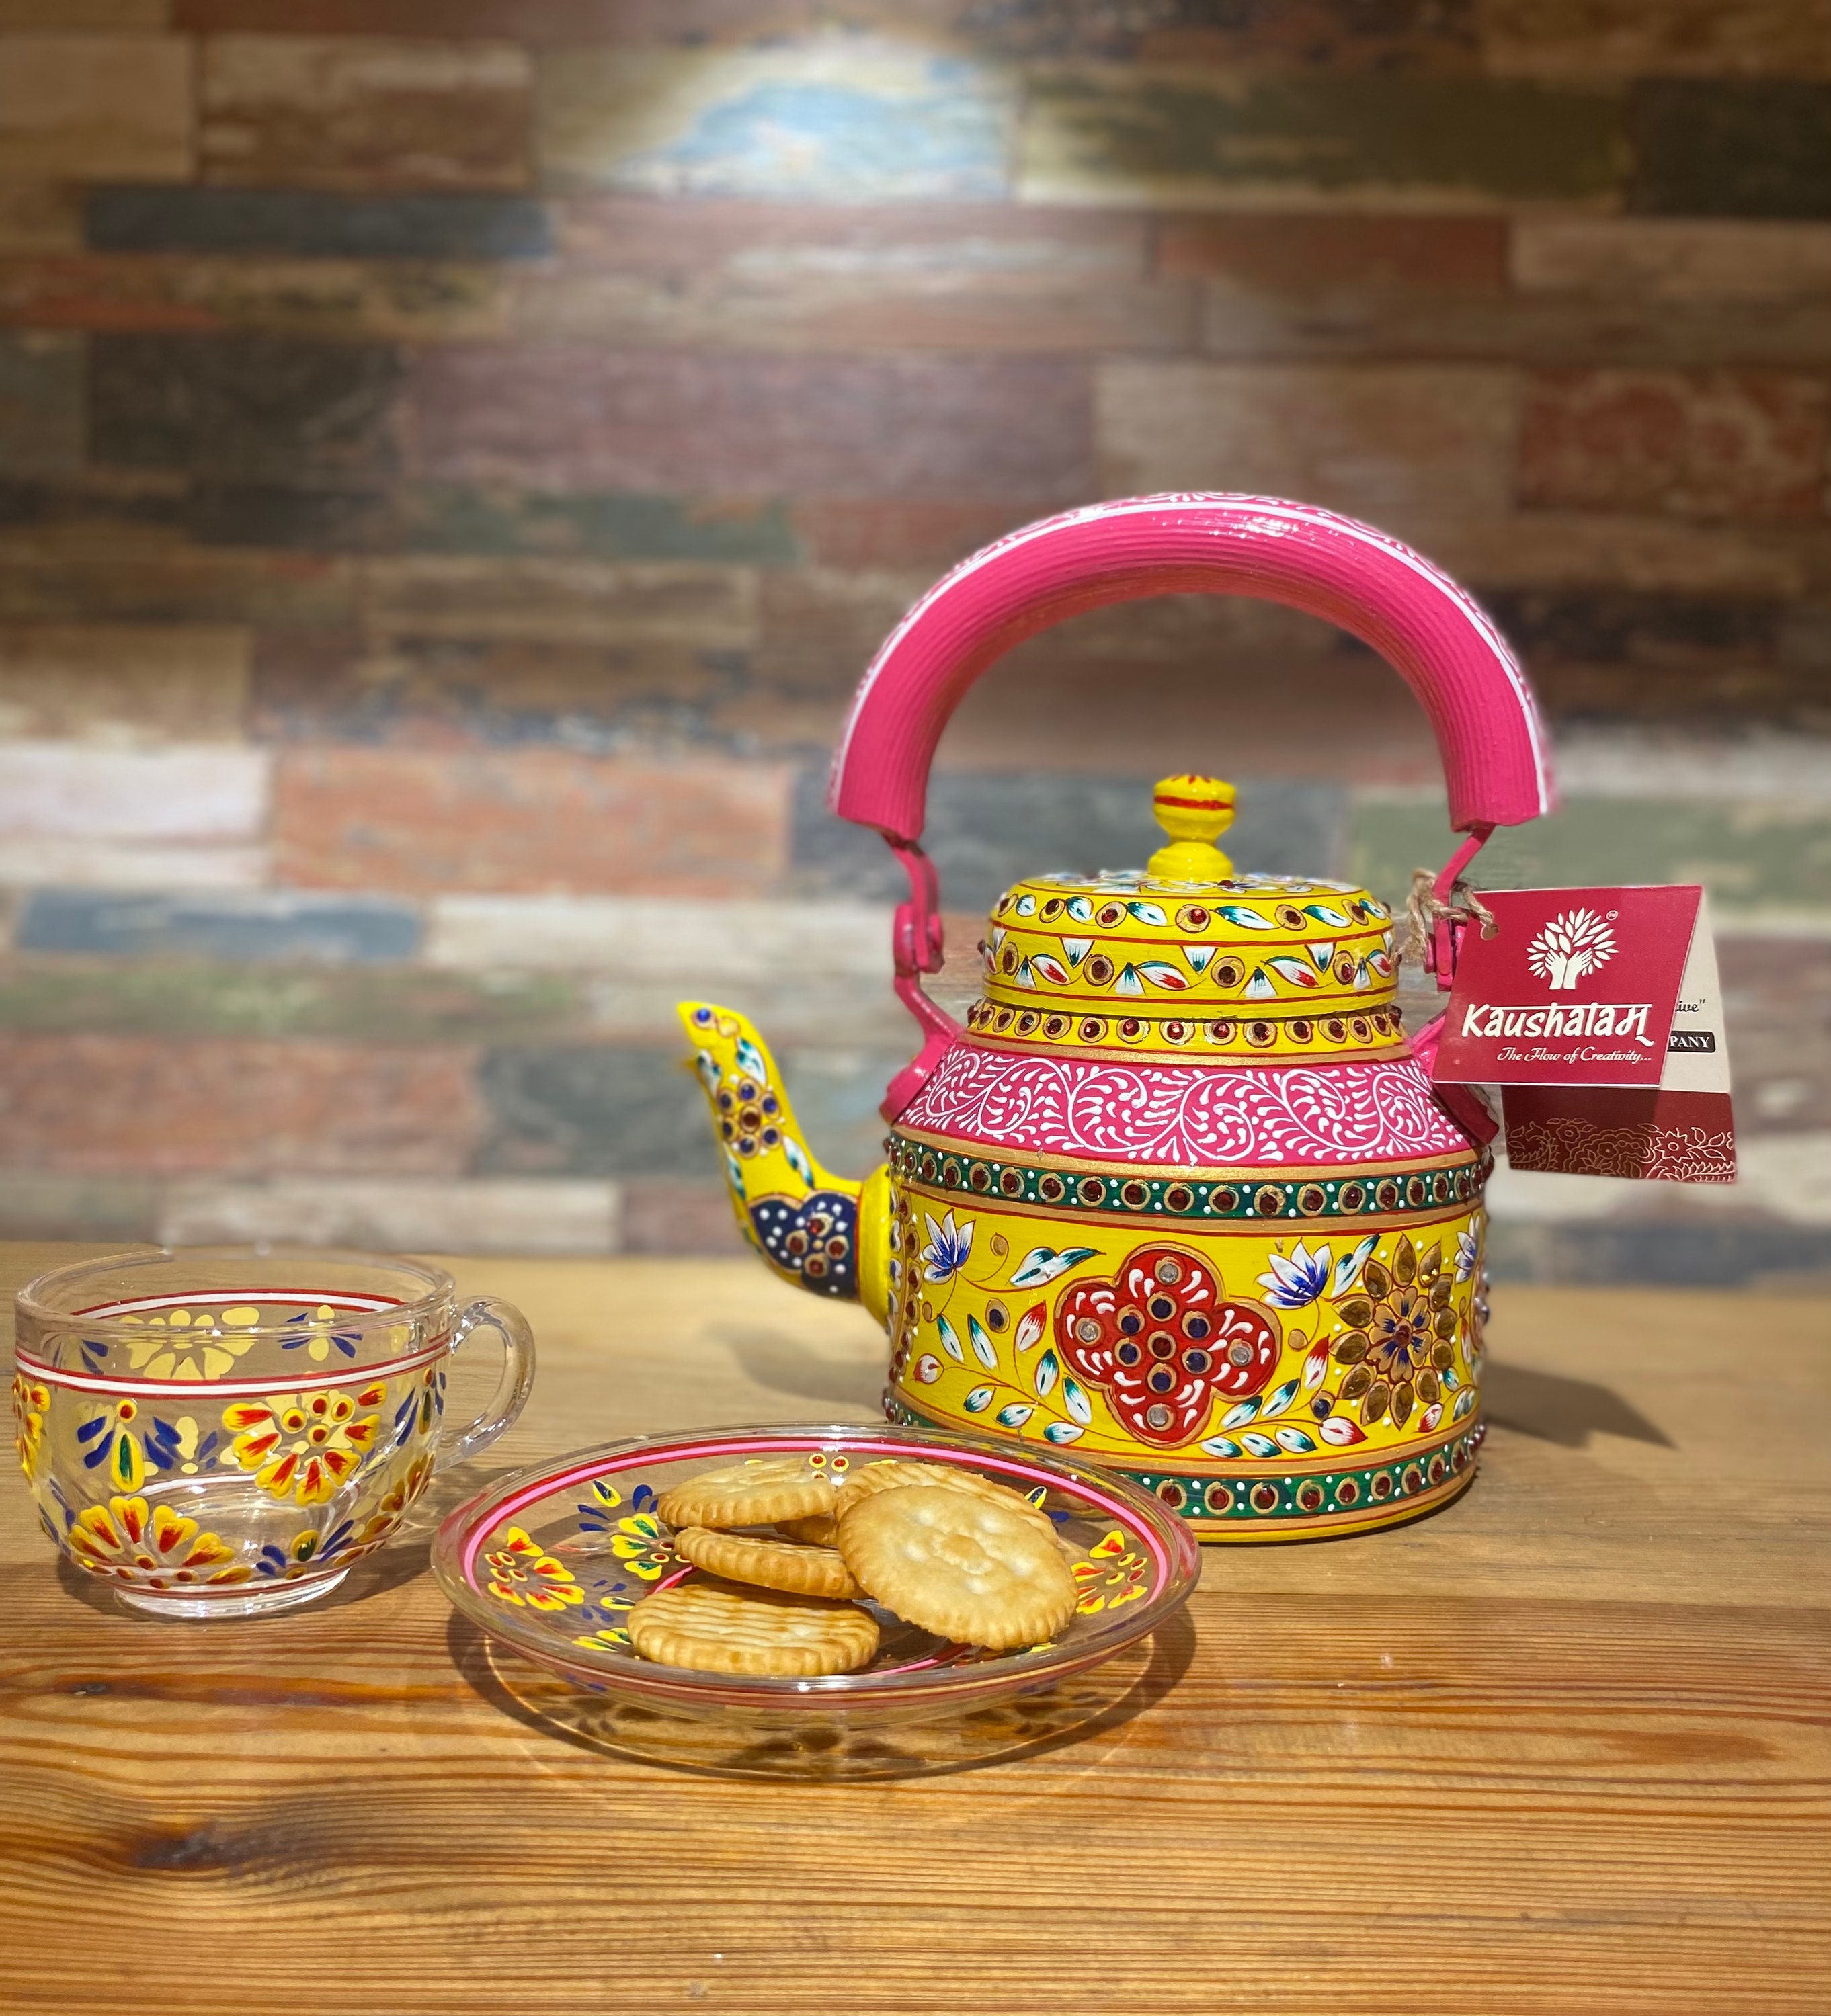 Kaushalam Hand Painted Stainless Steel Tea Kettle : Pink City